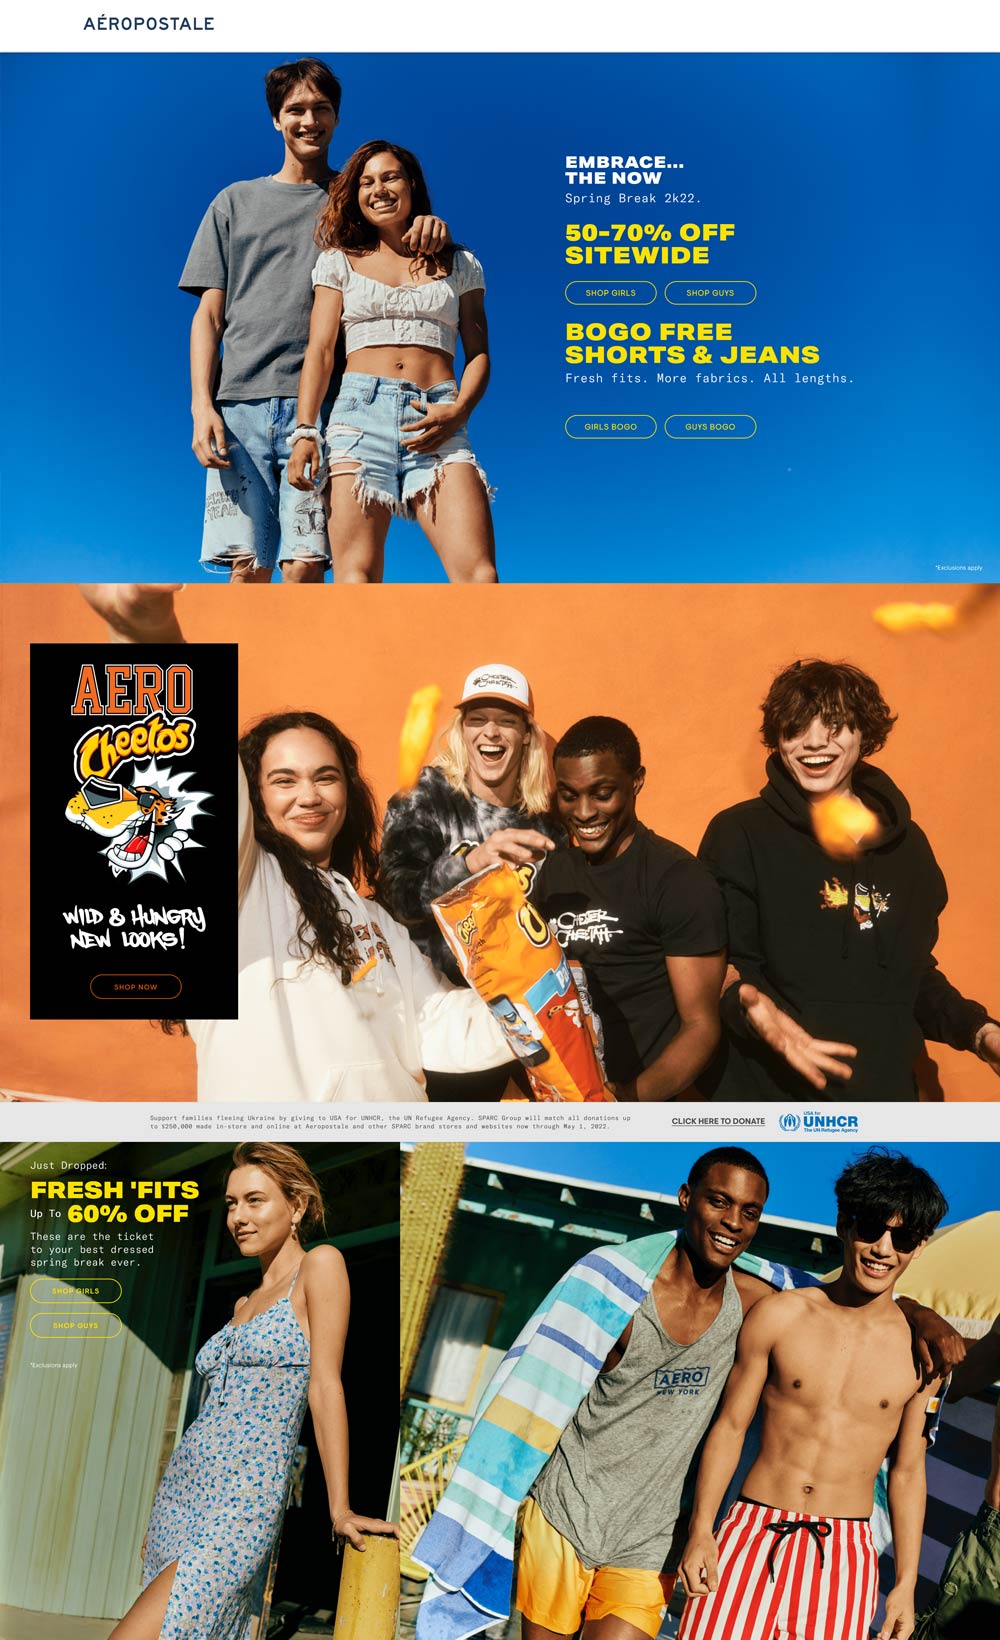 Aeropostale stores Coupon  Second shorts & jeans free + 50-70% off everything online at Aeropostale #aeropostale 